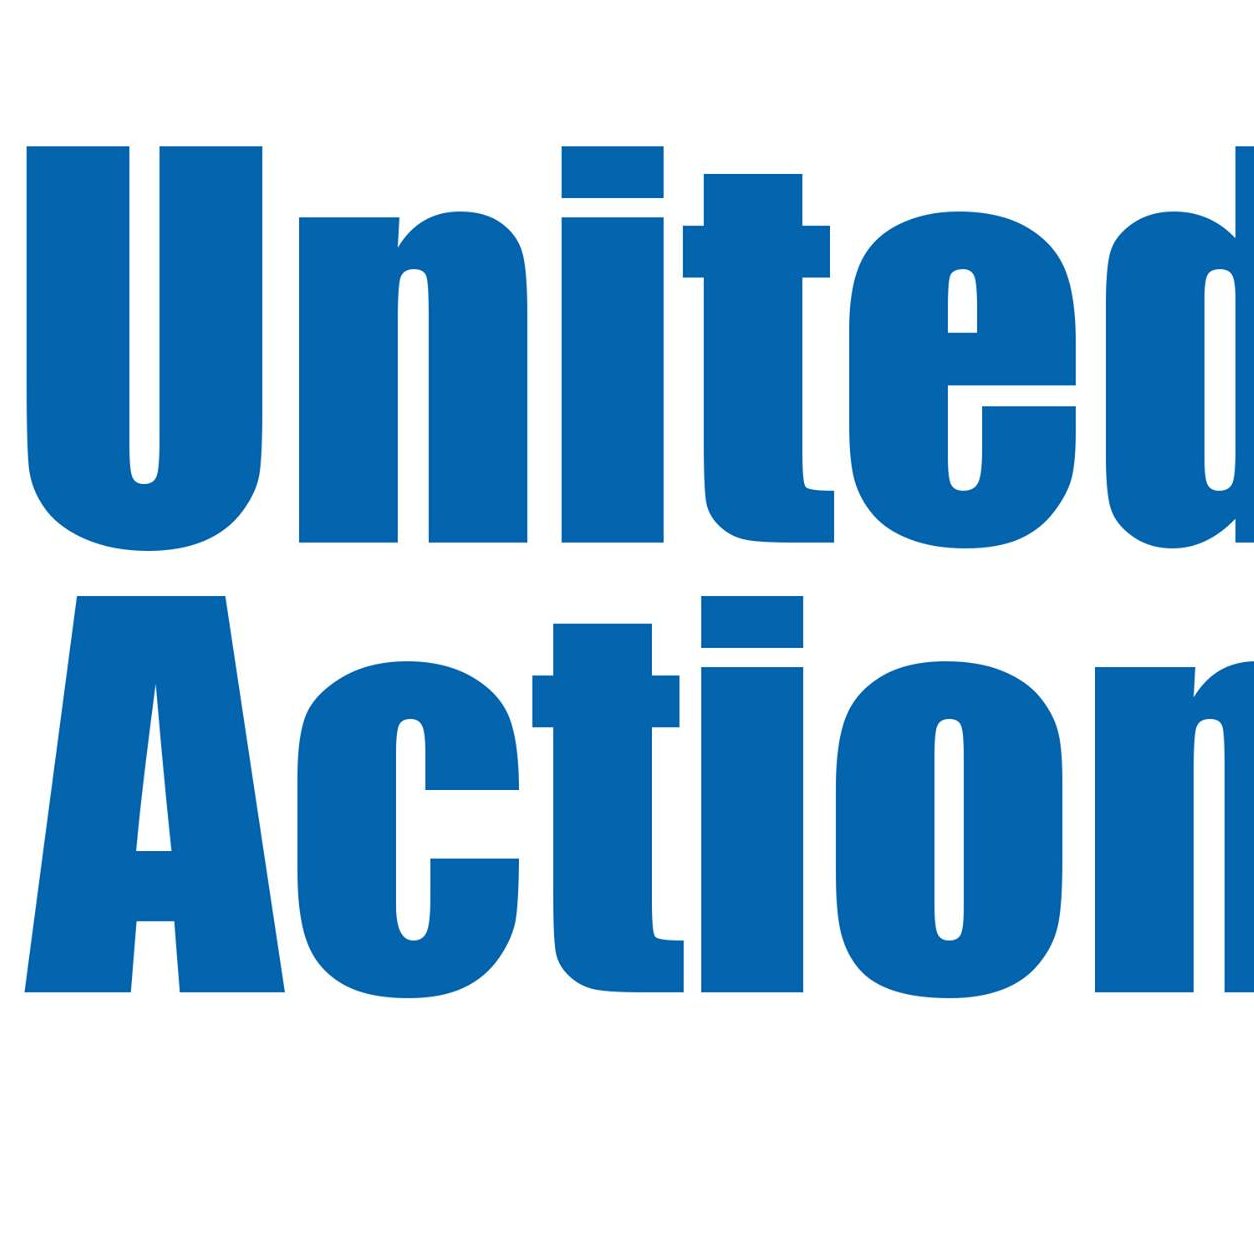 People United for Action (PUA) is dedicated to political participation on all levels to impact the electoral & policy-making process in Chicago & Illinois.